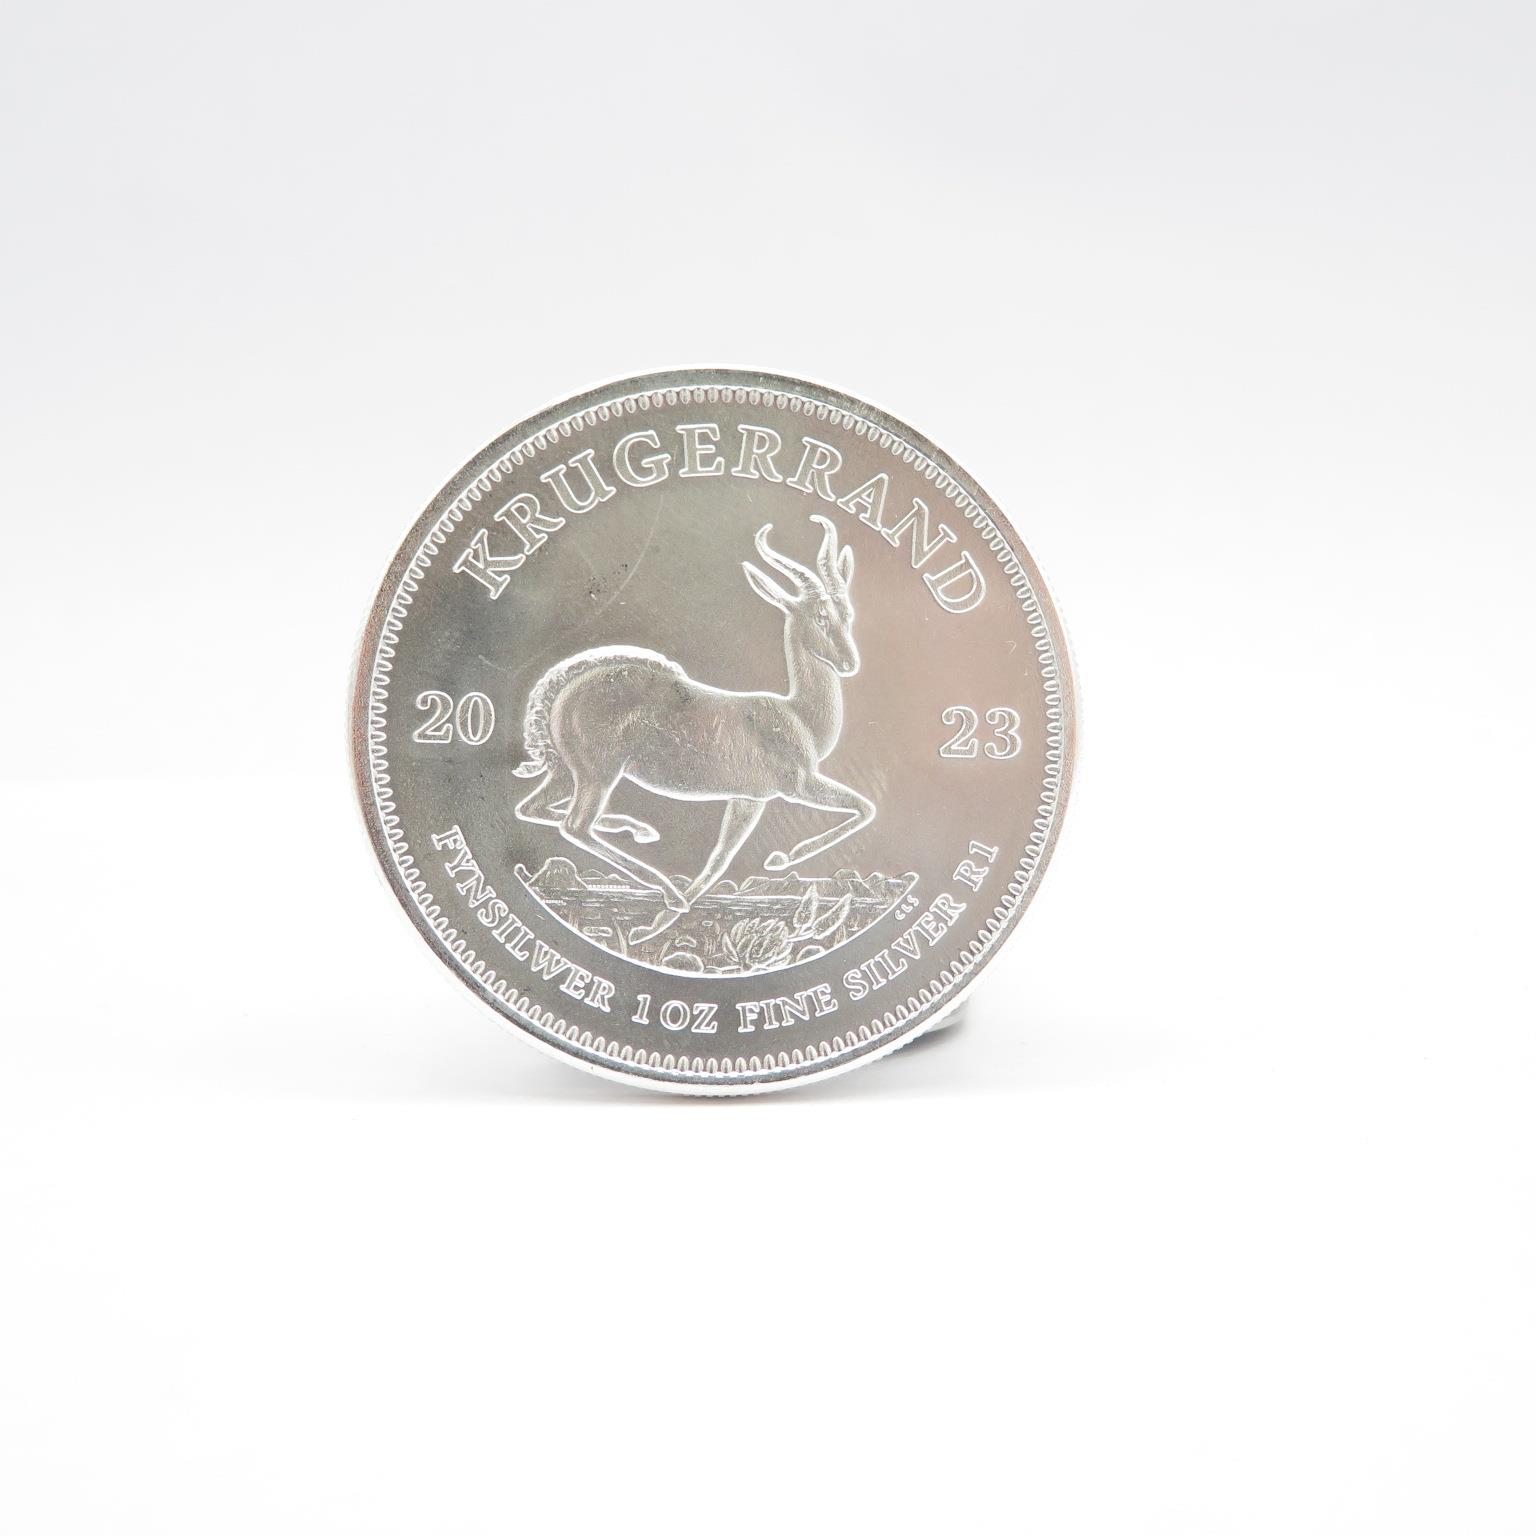 A 1oz pure silver Krugerrand silver coin - Image 2 of 2